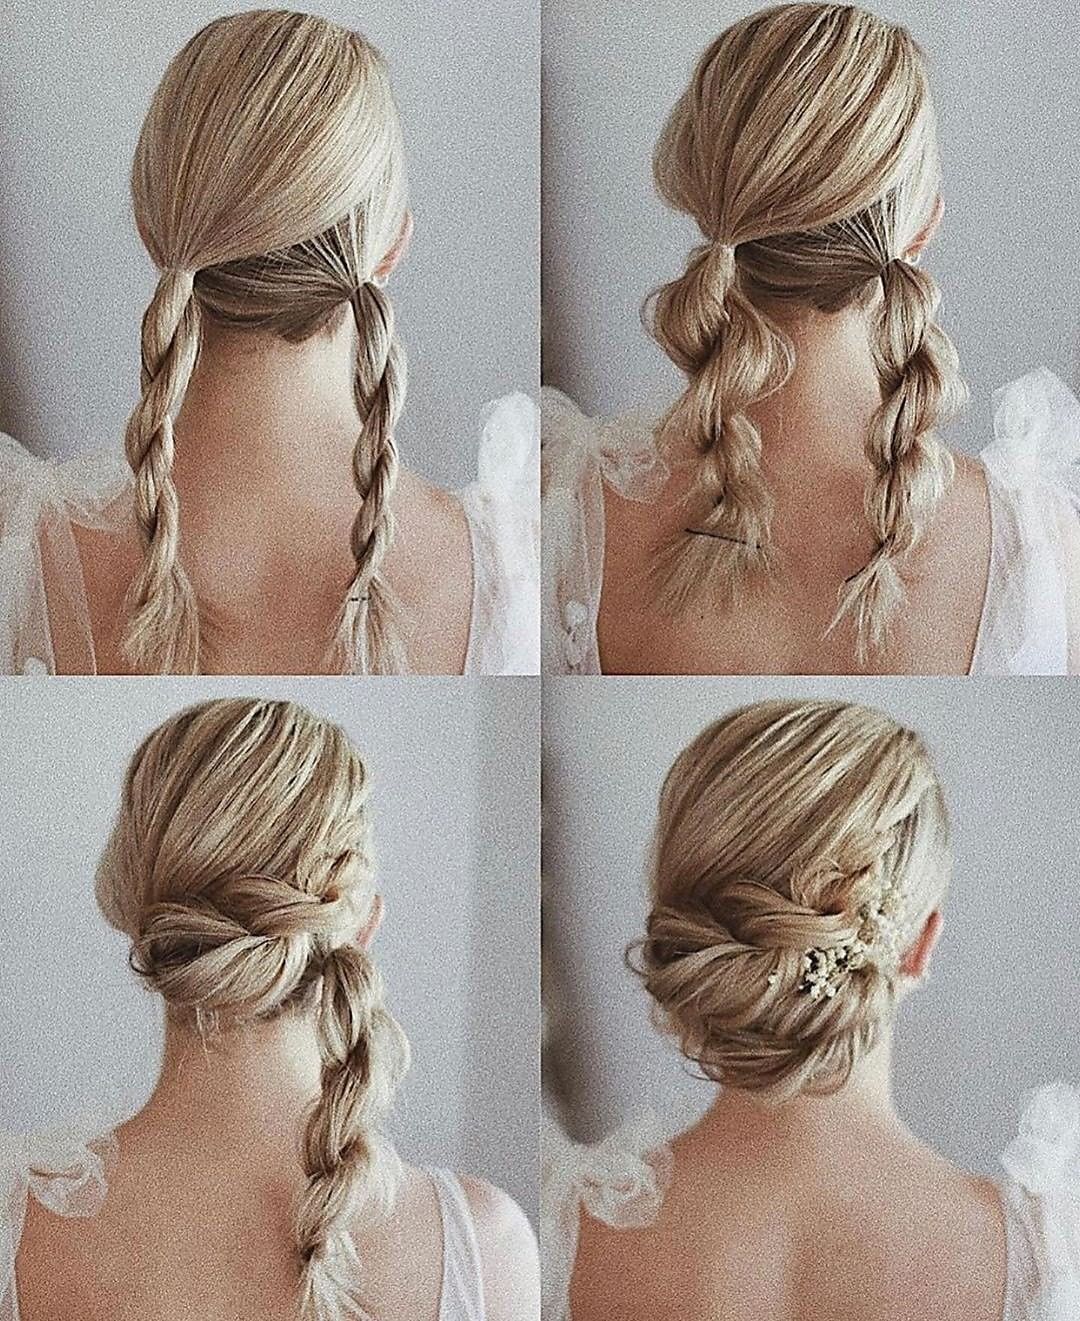 Schwarzkopf Professional - T W I S T E D 💛
Thanks for sharing these gorgeous
steps with us @ulyana.aster

#madetocreate #hairstyle #updo
#blondehair #bridalhair #hairtrends
#hairstyle #hairinspo #hair...